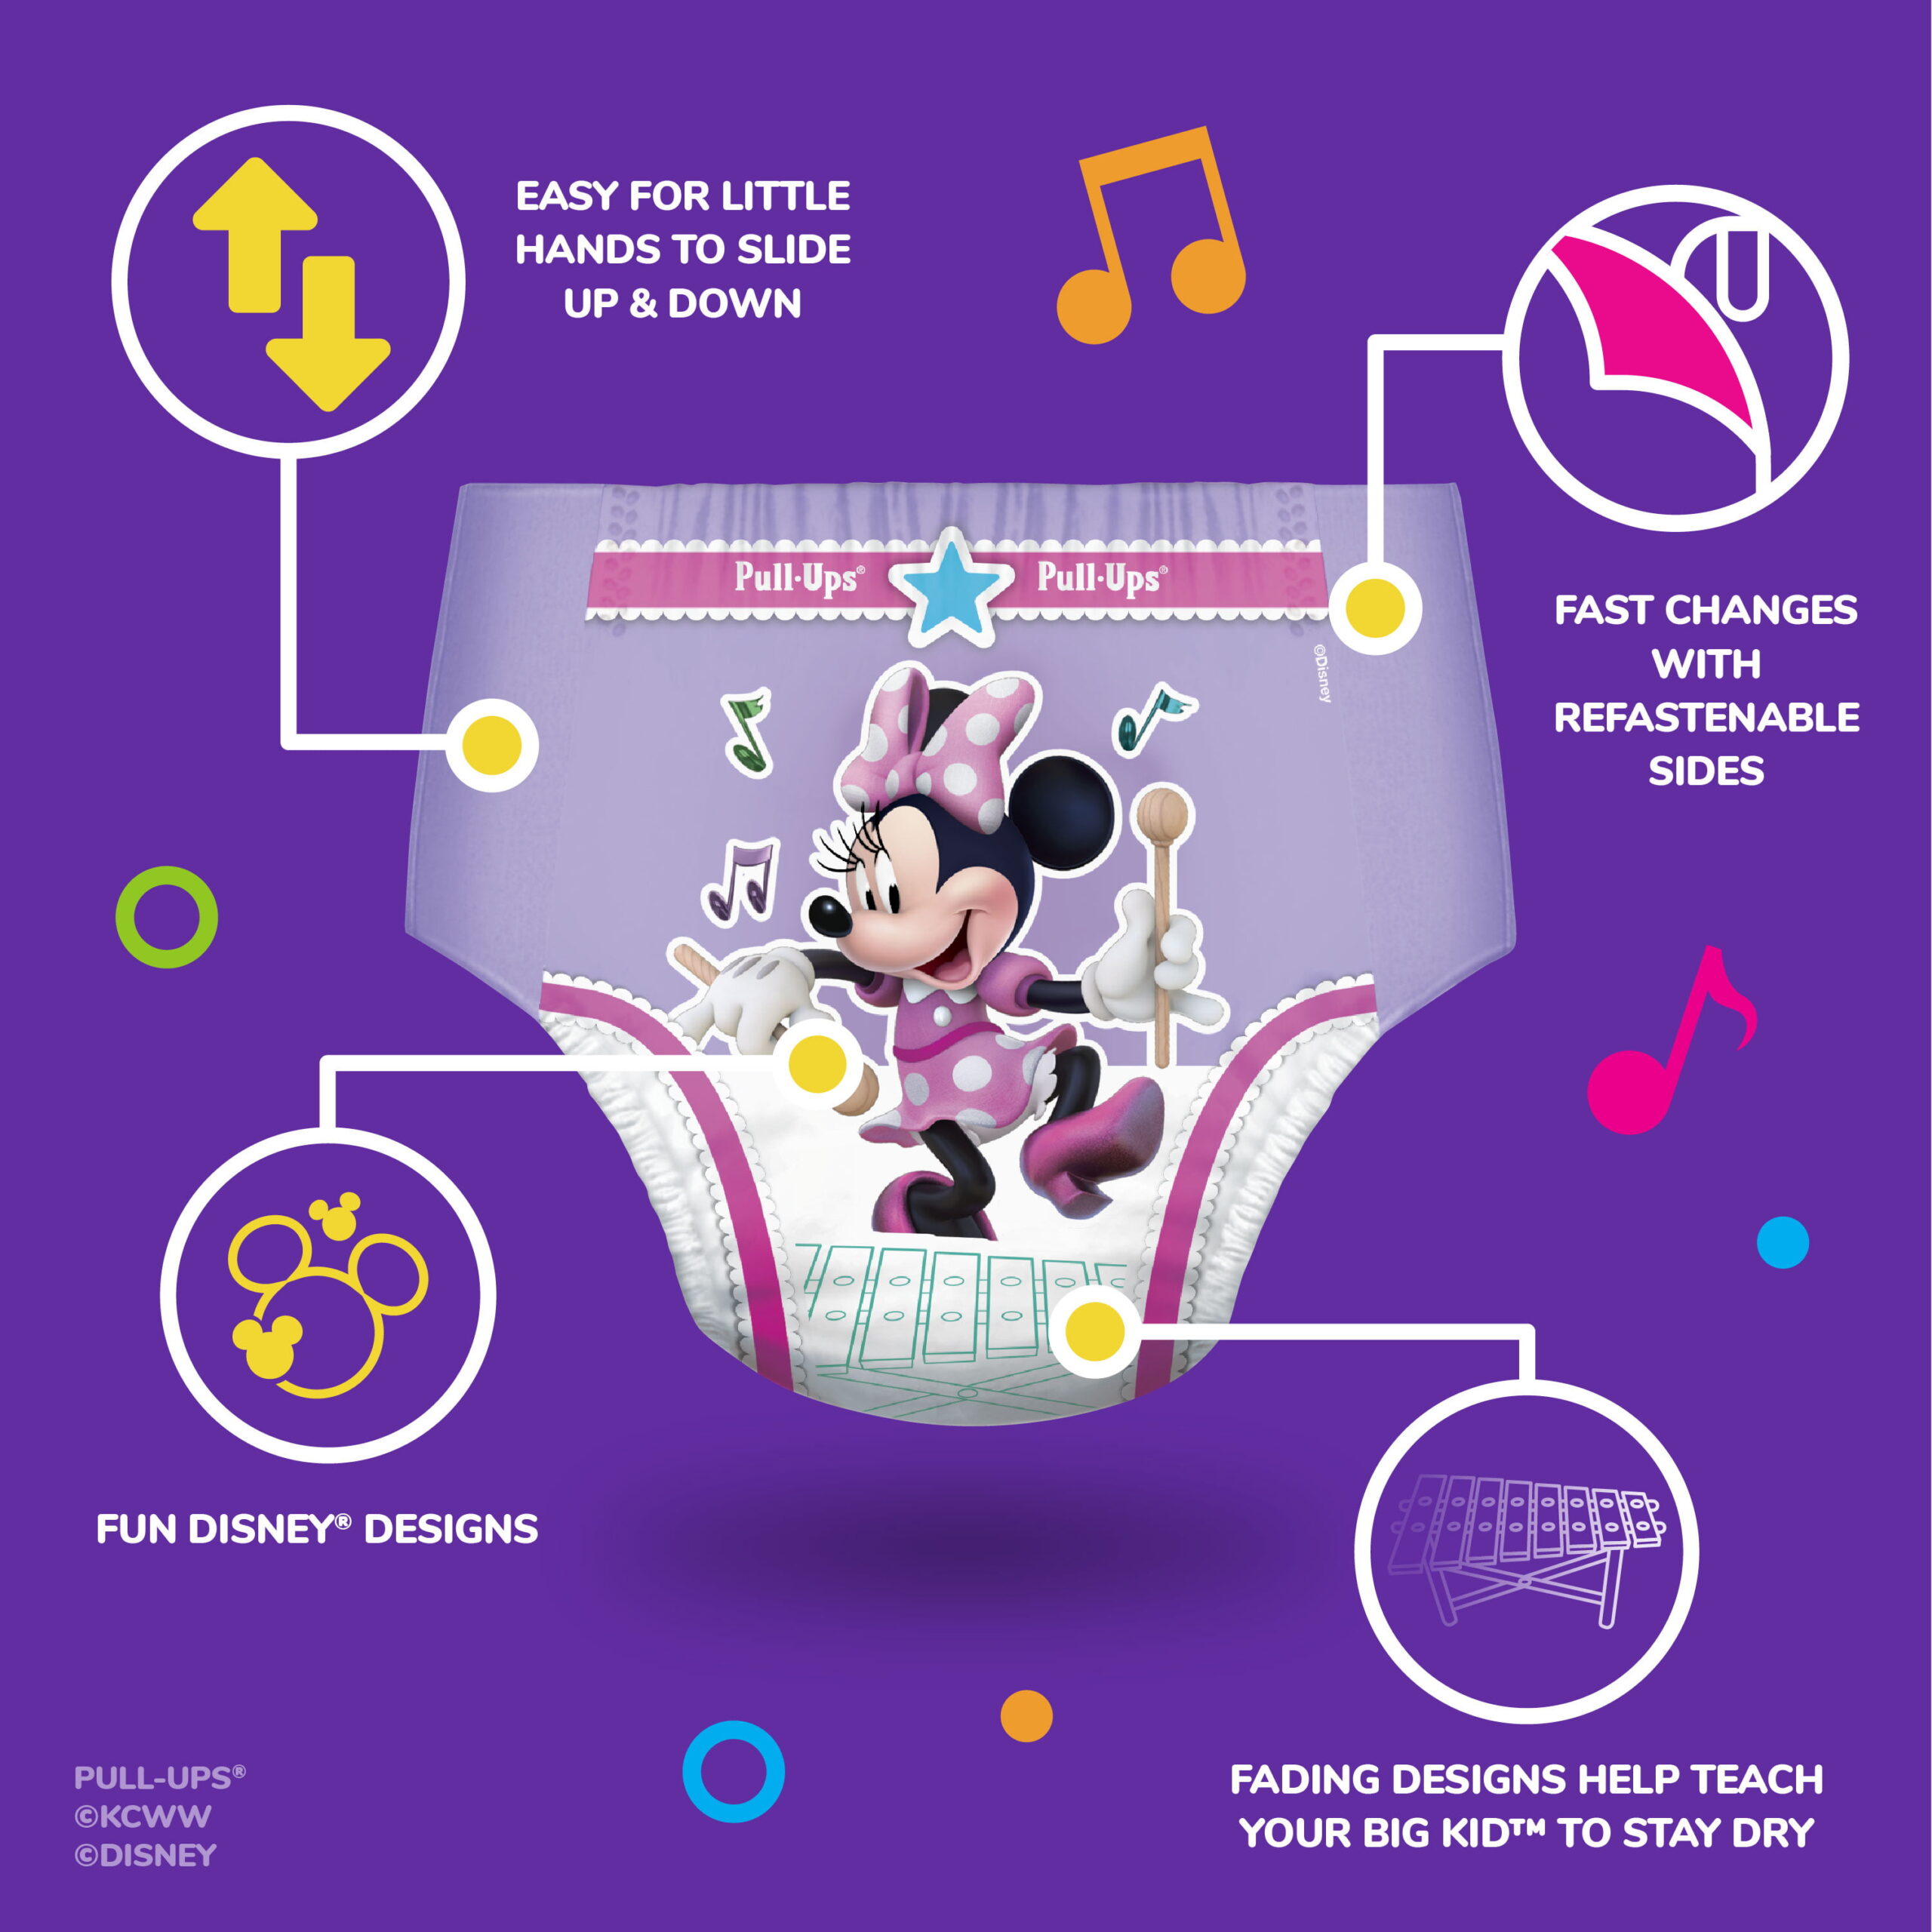 Huggies girl's Pull-Ups training pants, 5t-6t, Minnie Mouse, 24